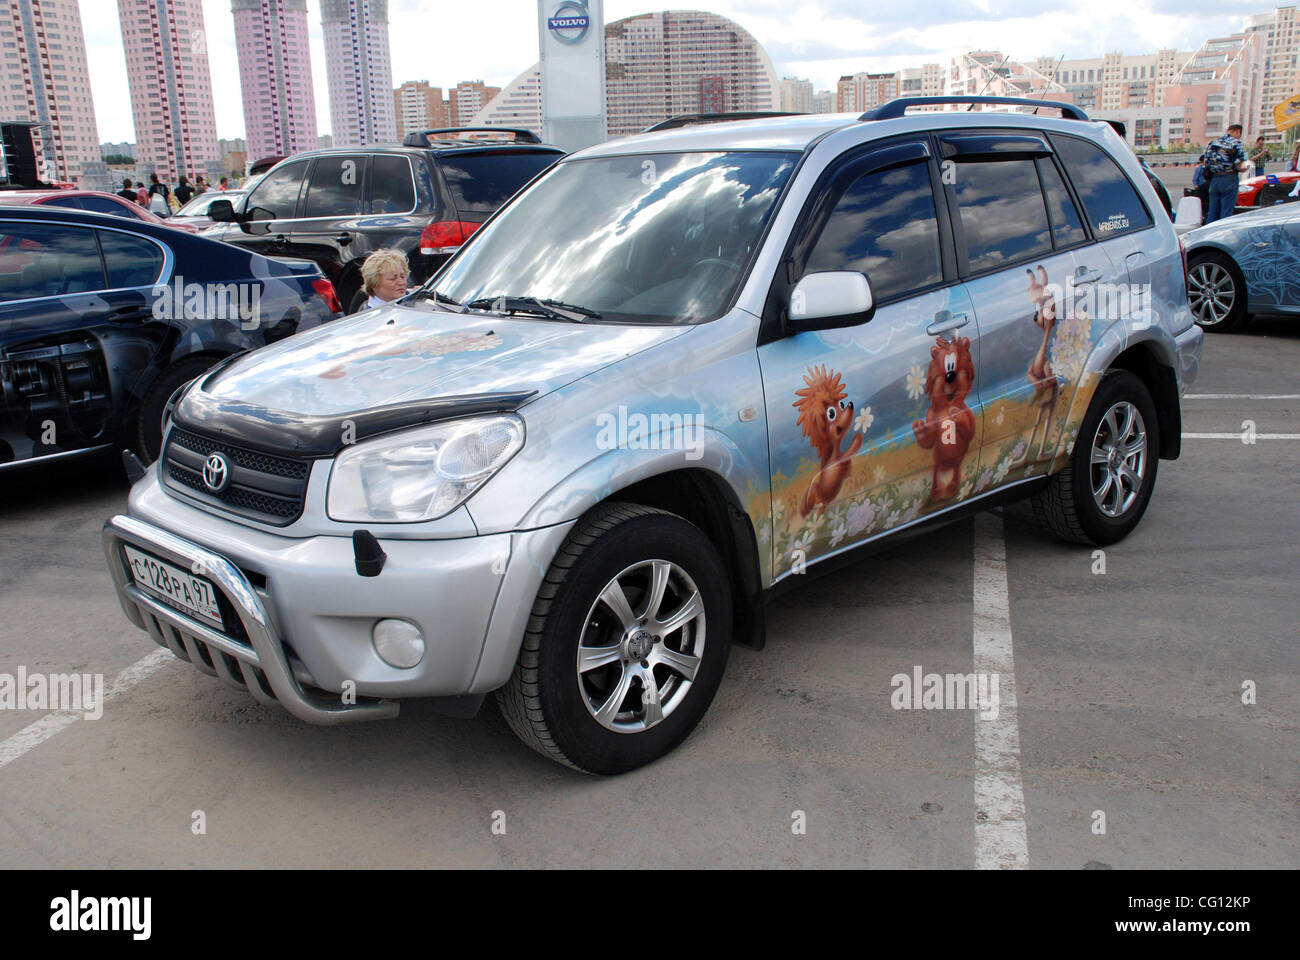 Aerograph-2007 festival in Moscow. Cars painted with unusual images and pictures on it. Stock Photo